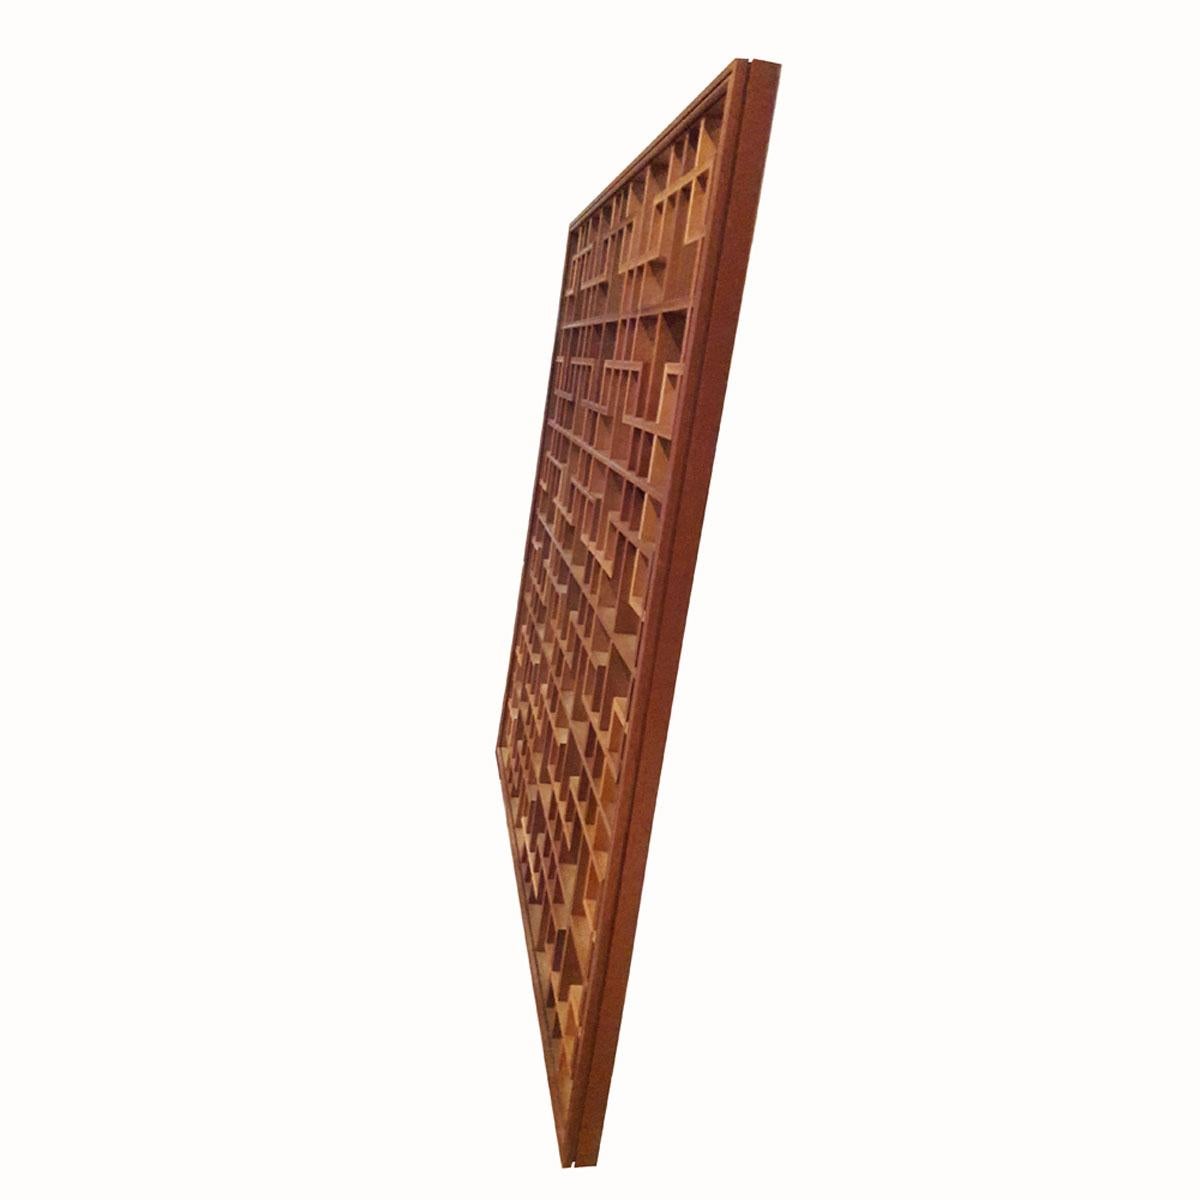 A wood lattice panel / wall screen, handcrafted in United States. This piece was inspired by an antique Qing Chinese panel. Its straight lines, superb finish and precise craftsmanship make this item an elegant addition to practically any decor style.